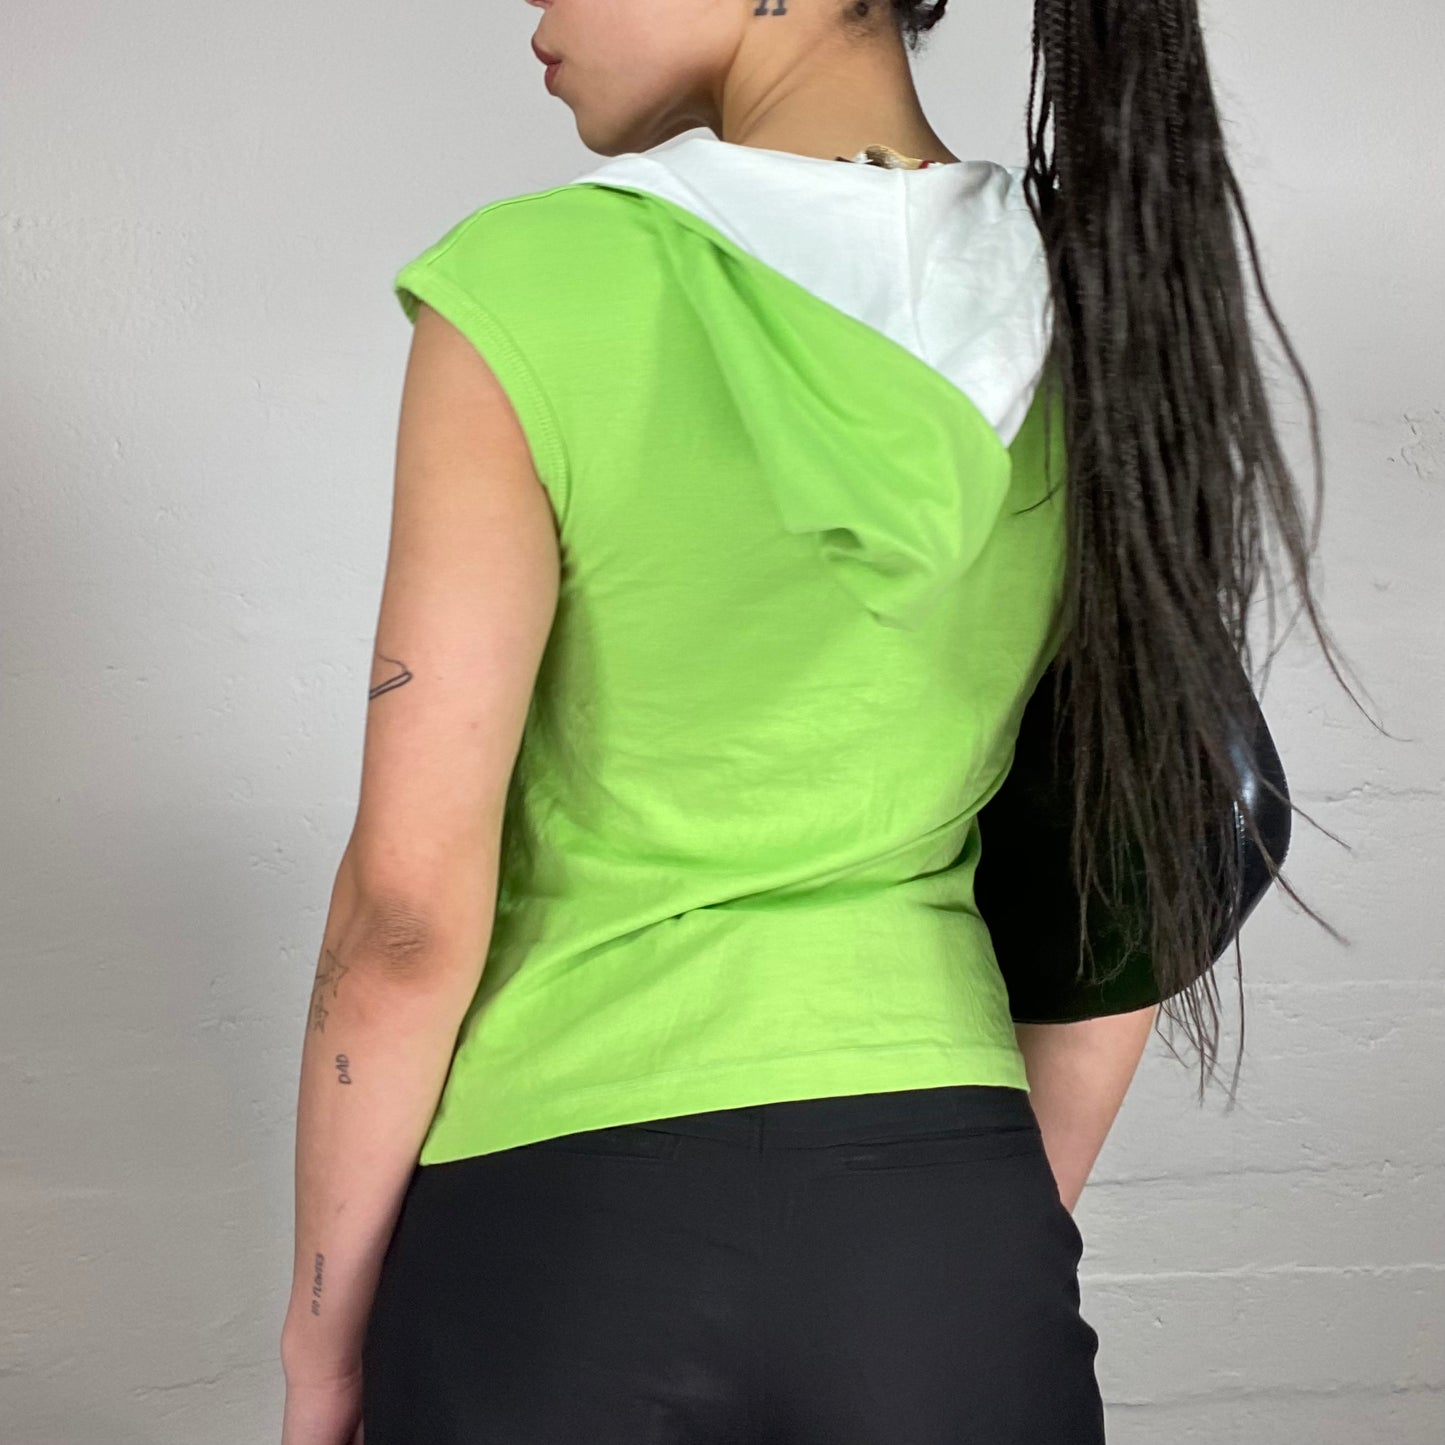 Vintage 90’ Sporty Neon Green Hooded Tank Top with Contrast White Lining (M)